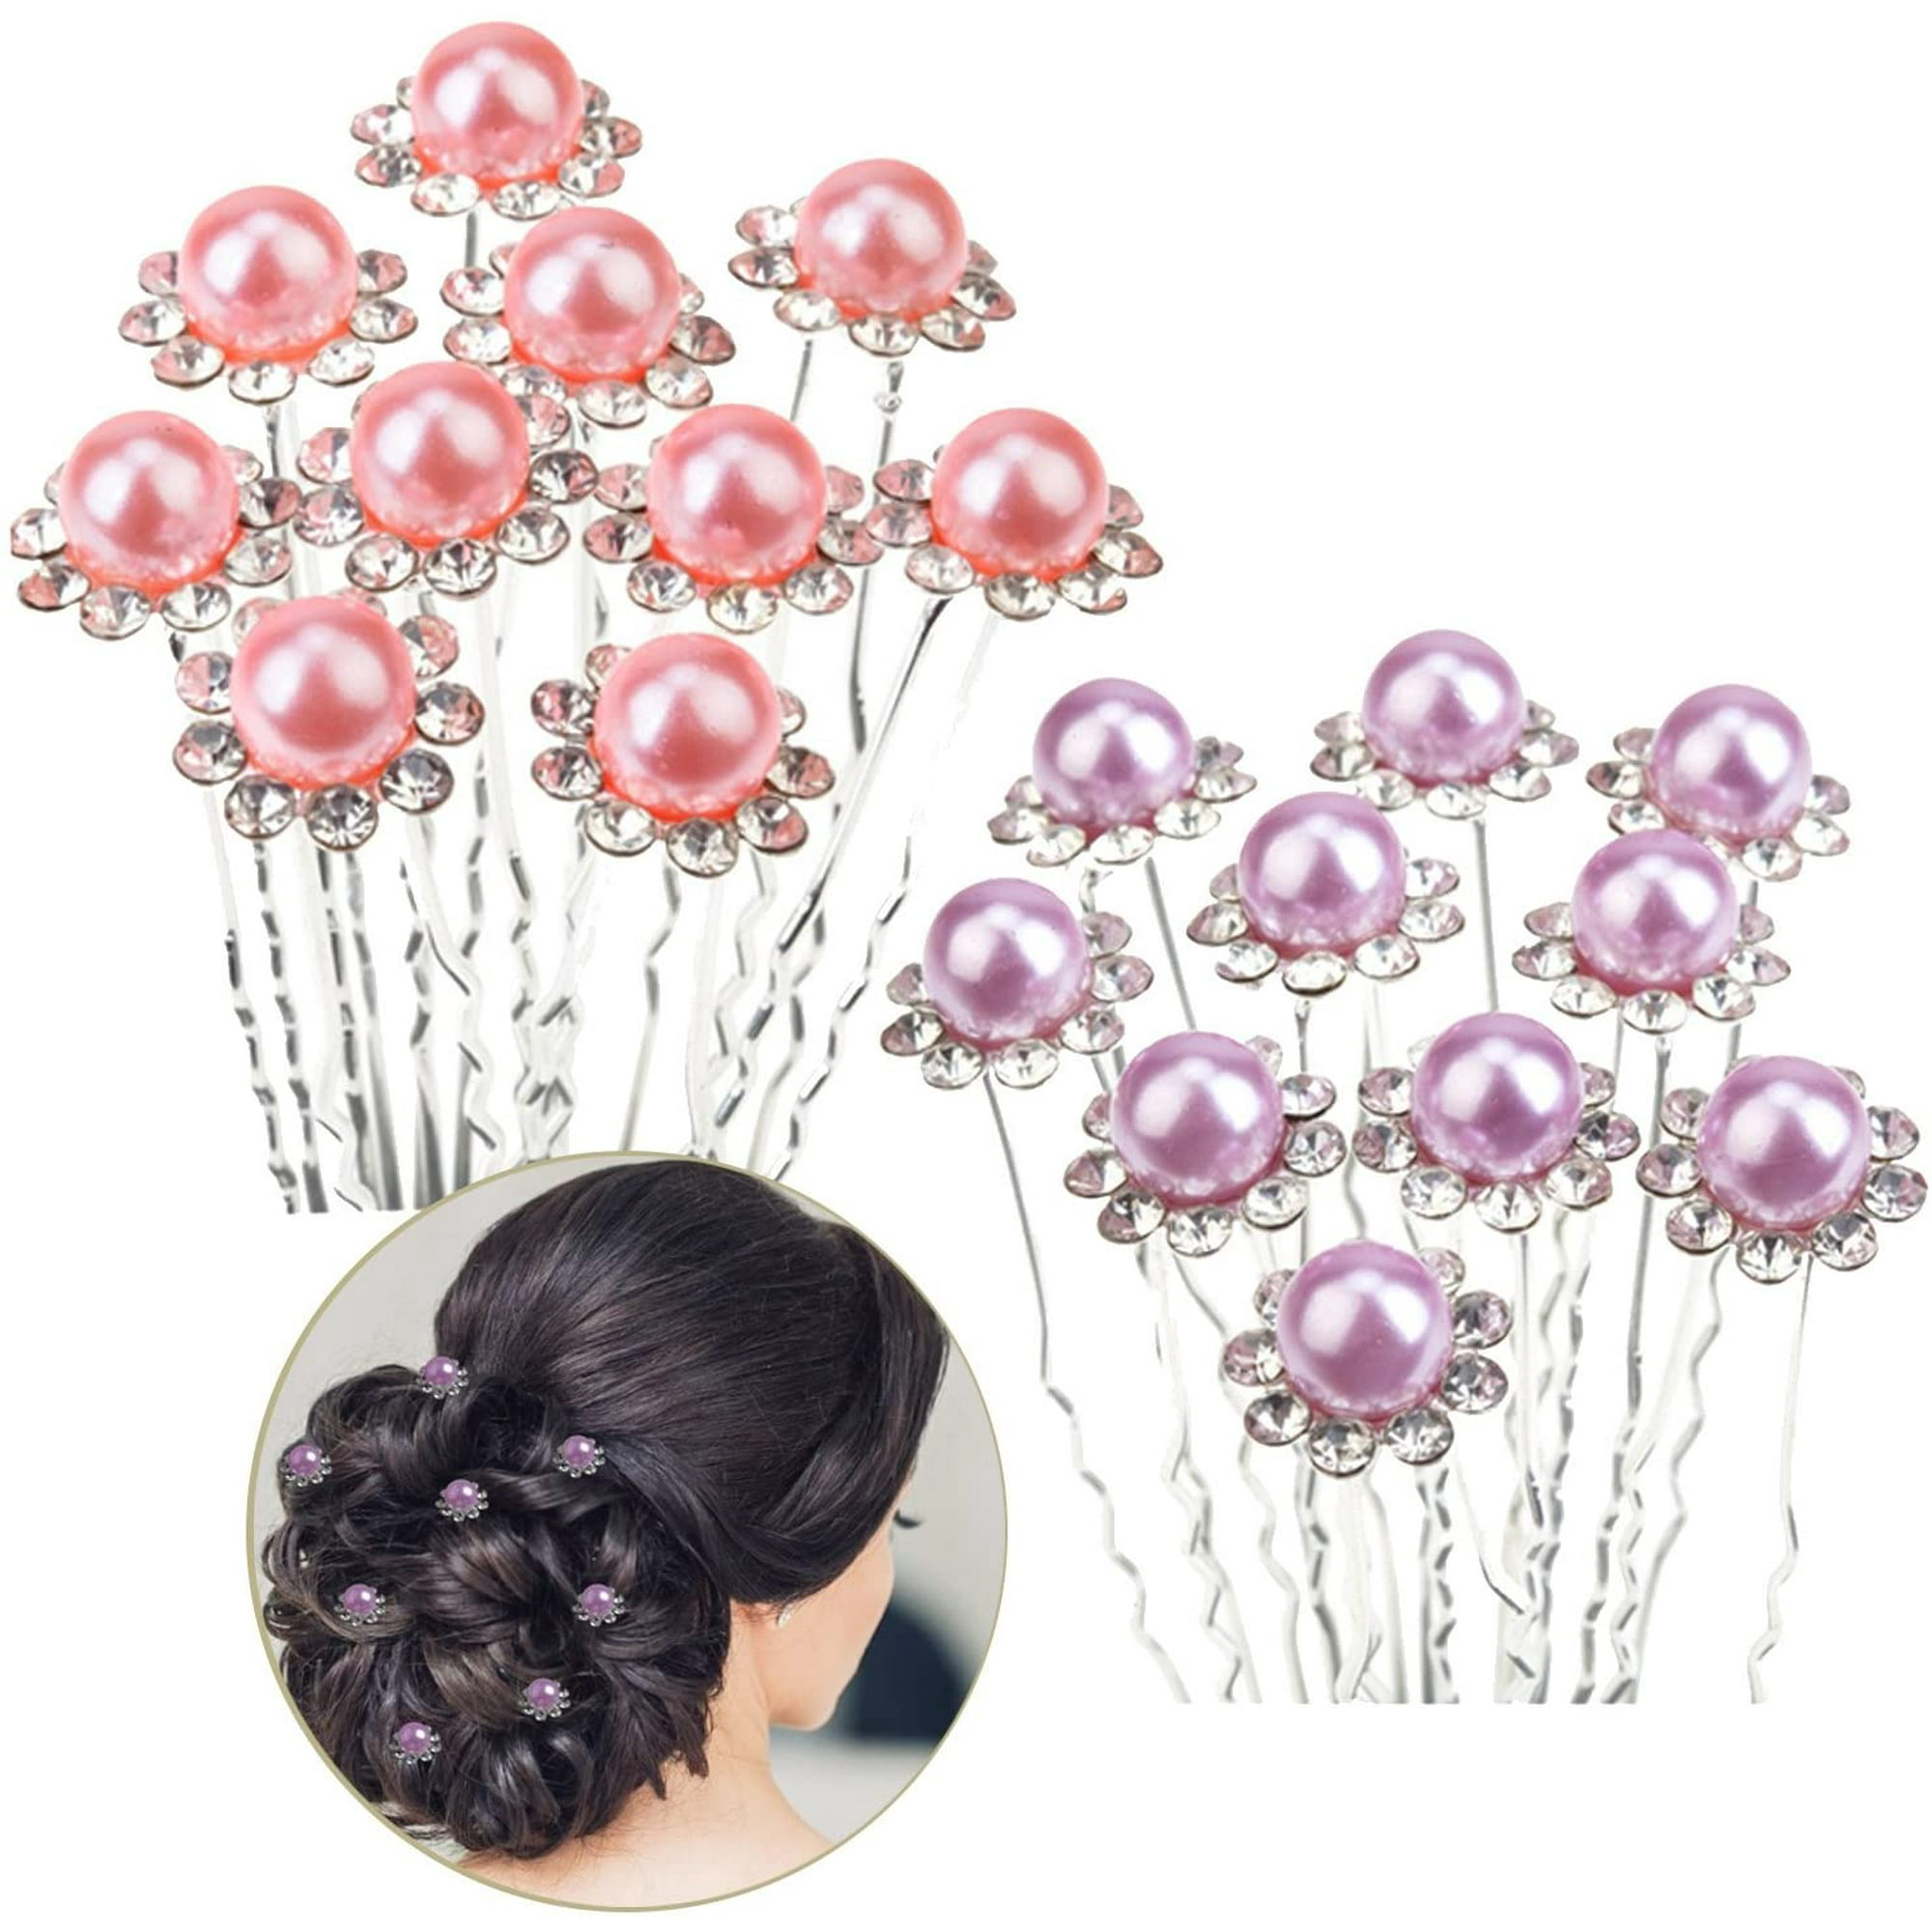 Set of 20pcs Flowers Hair Pins/Slides/Barrettes/Weddings Brides/Proms/Balls  Hairstyles Decorations With Silver Needles, Pink And Purple Pearls And  Clear Crystals/Rhinestones By | Walmart Canada